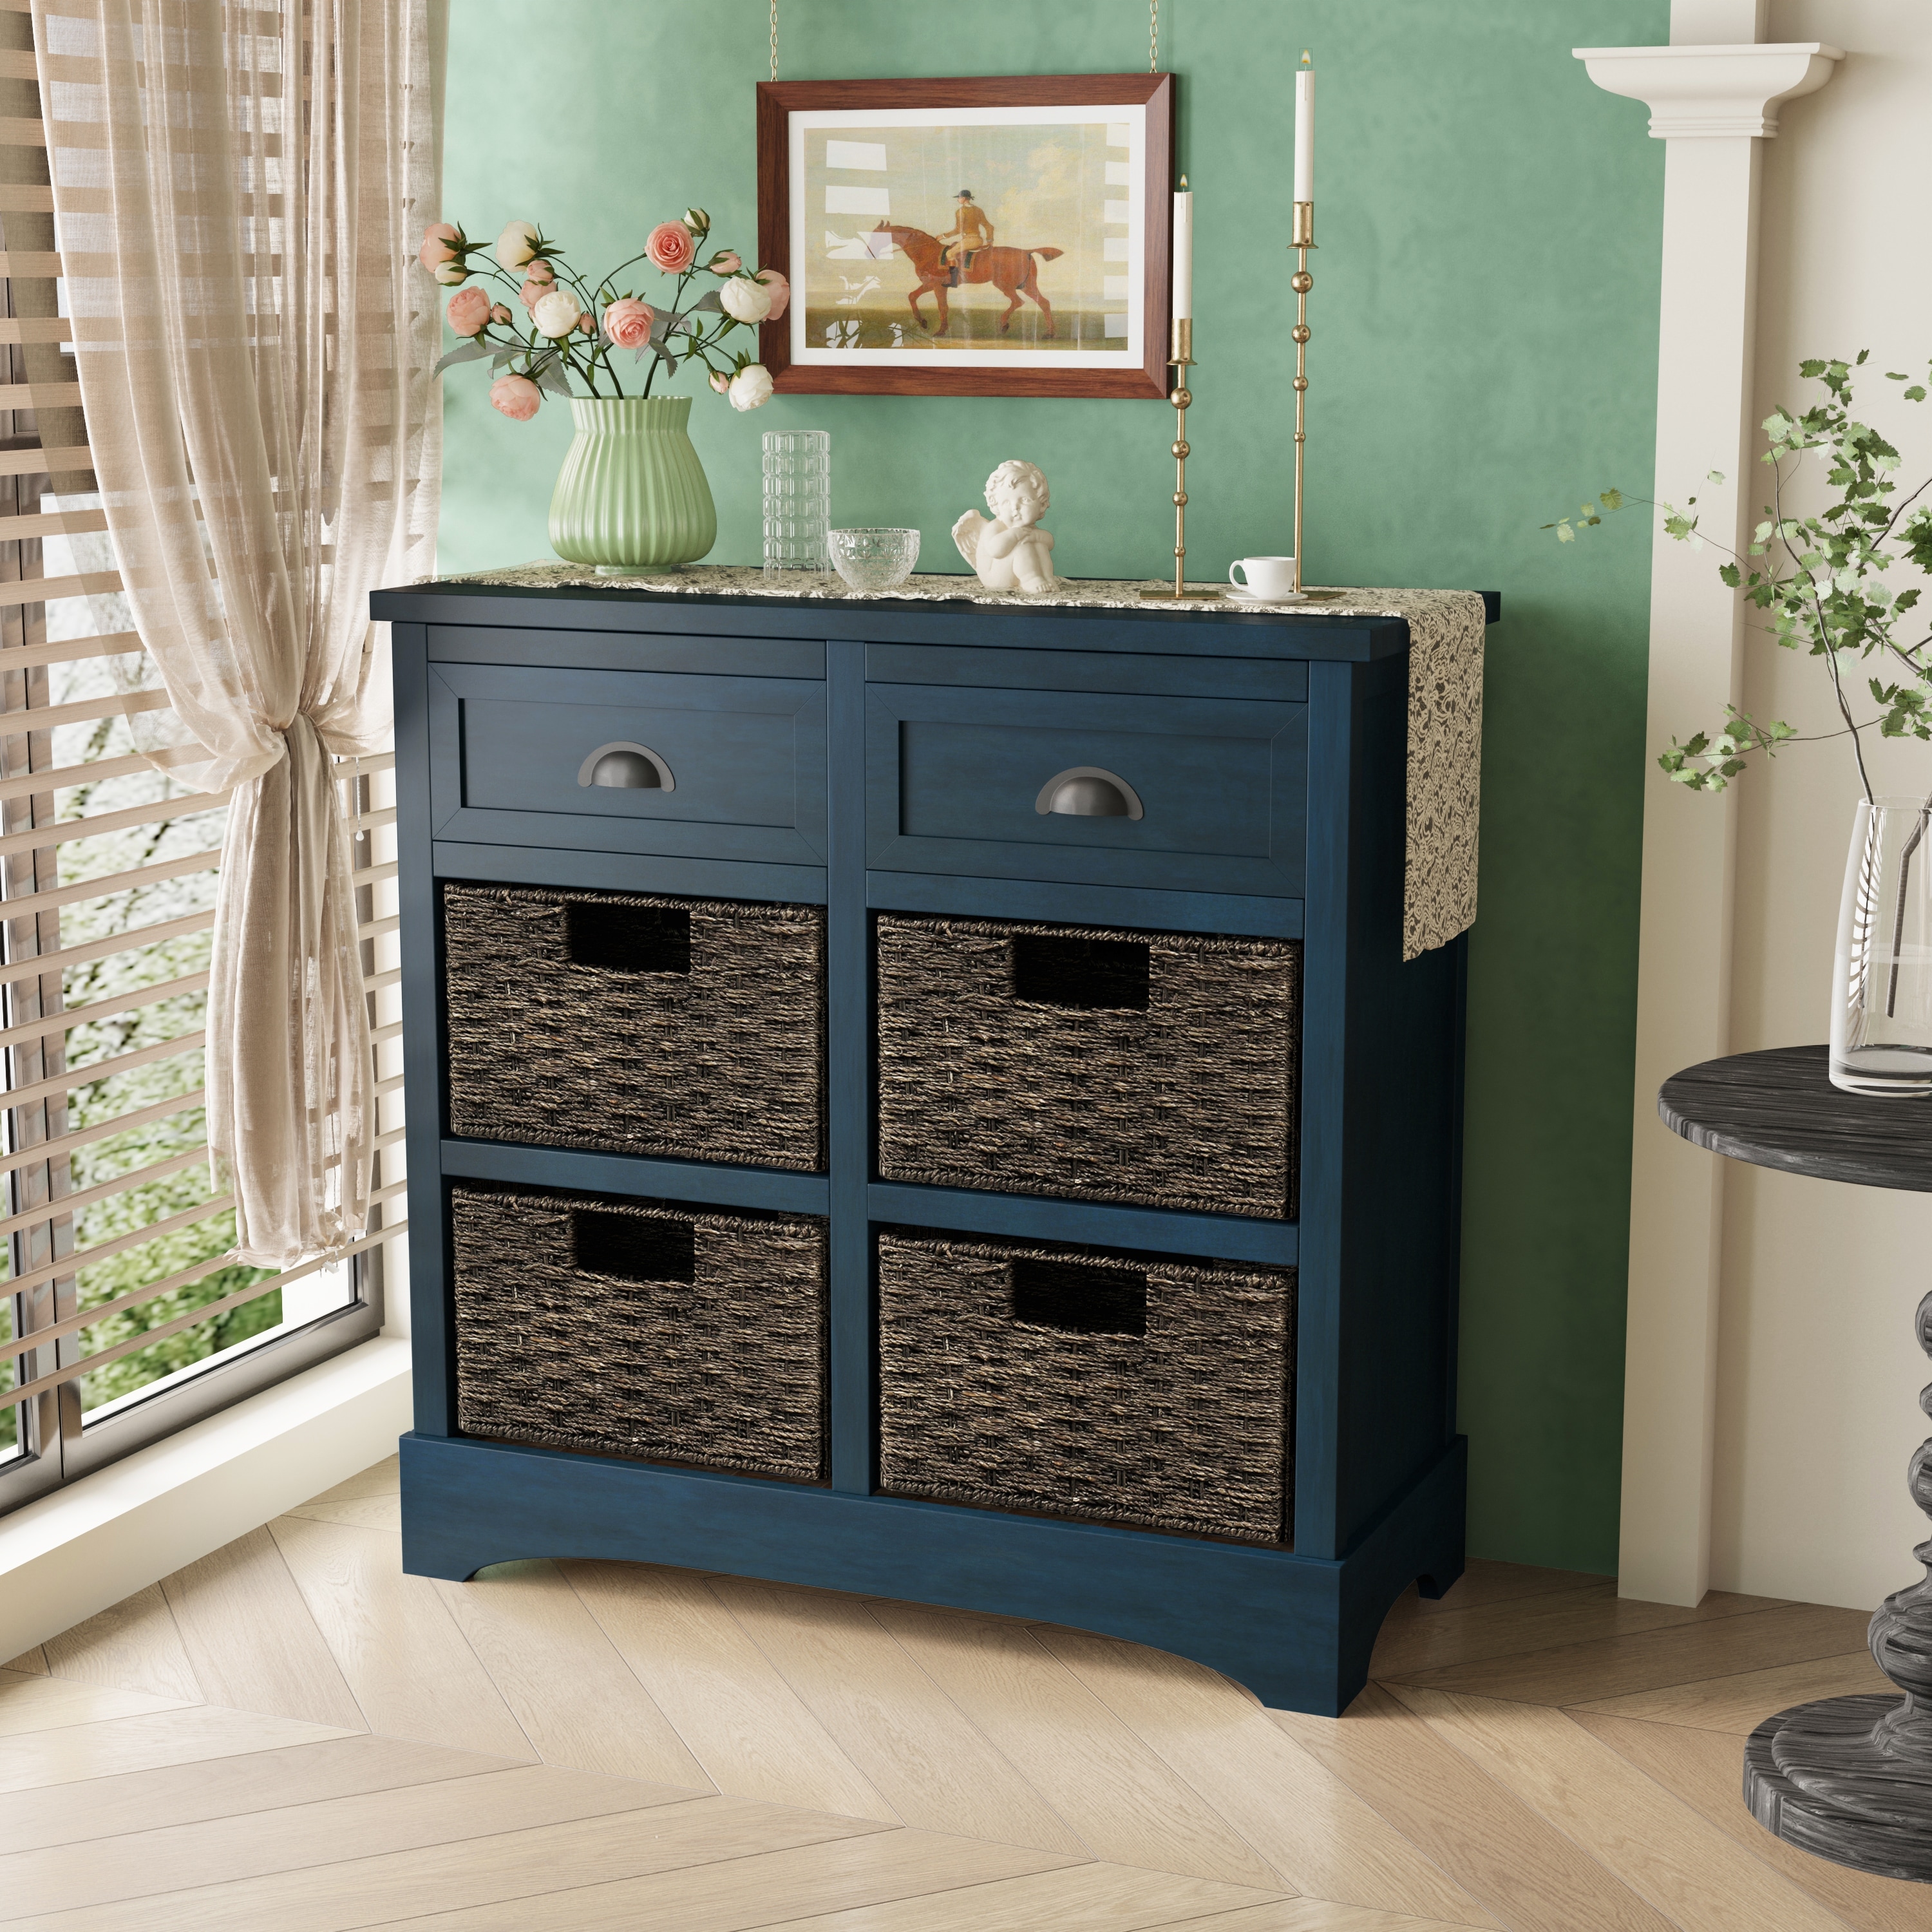 https://ak1.ostkcdn.com/images/products/is/images/direct/7b5398e09d796e5e3d668f01afe9d55c1c3d3c18/Rustic-Storage-Cabinet-with-Two-Drawers-and-Four-Classic-Rattan-Basket-for-Dining-Room-Living-Room.jpg